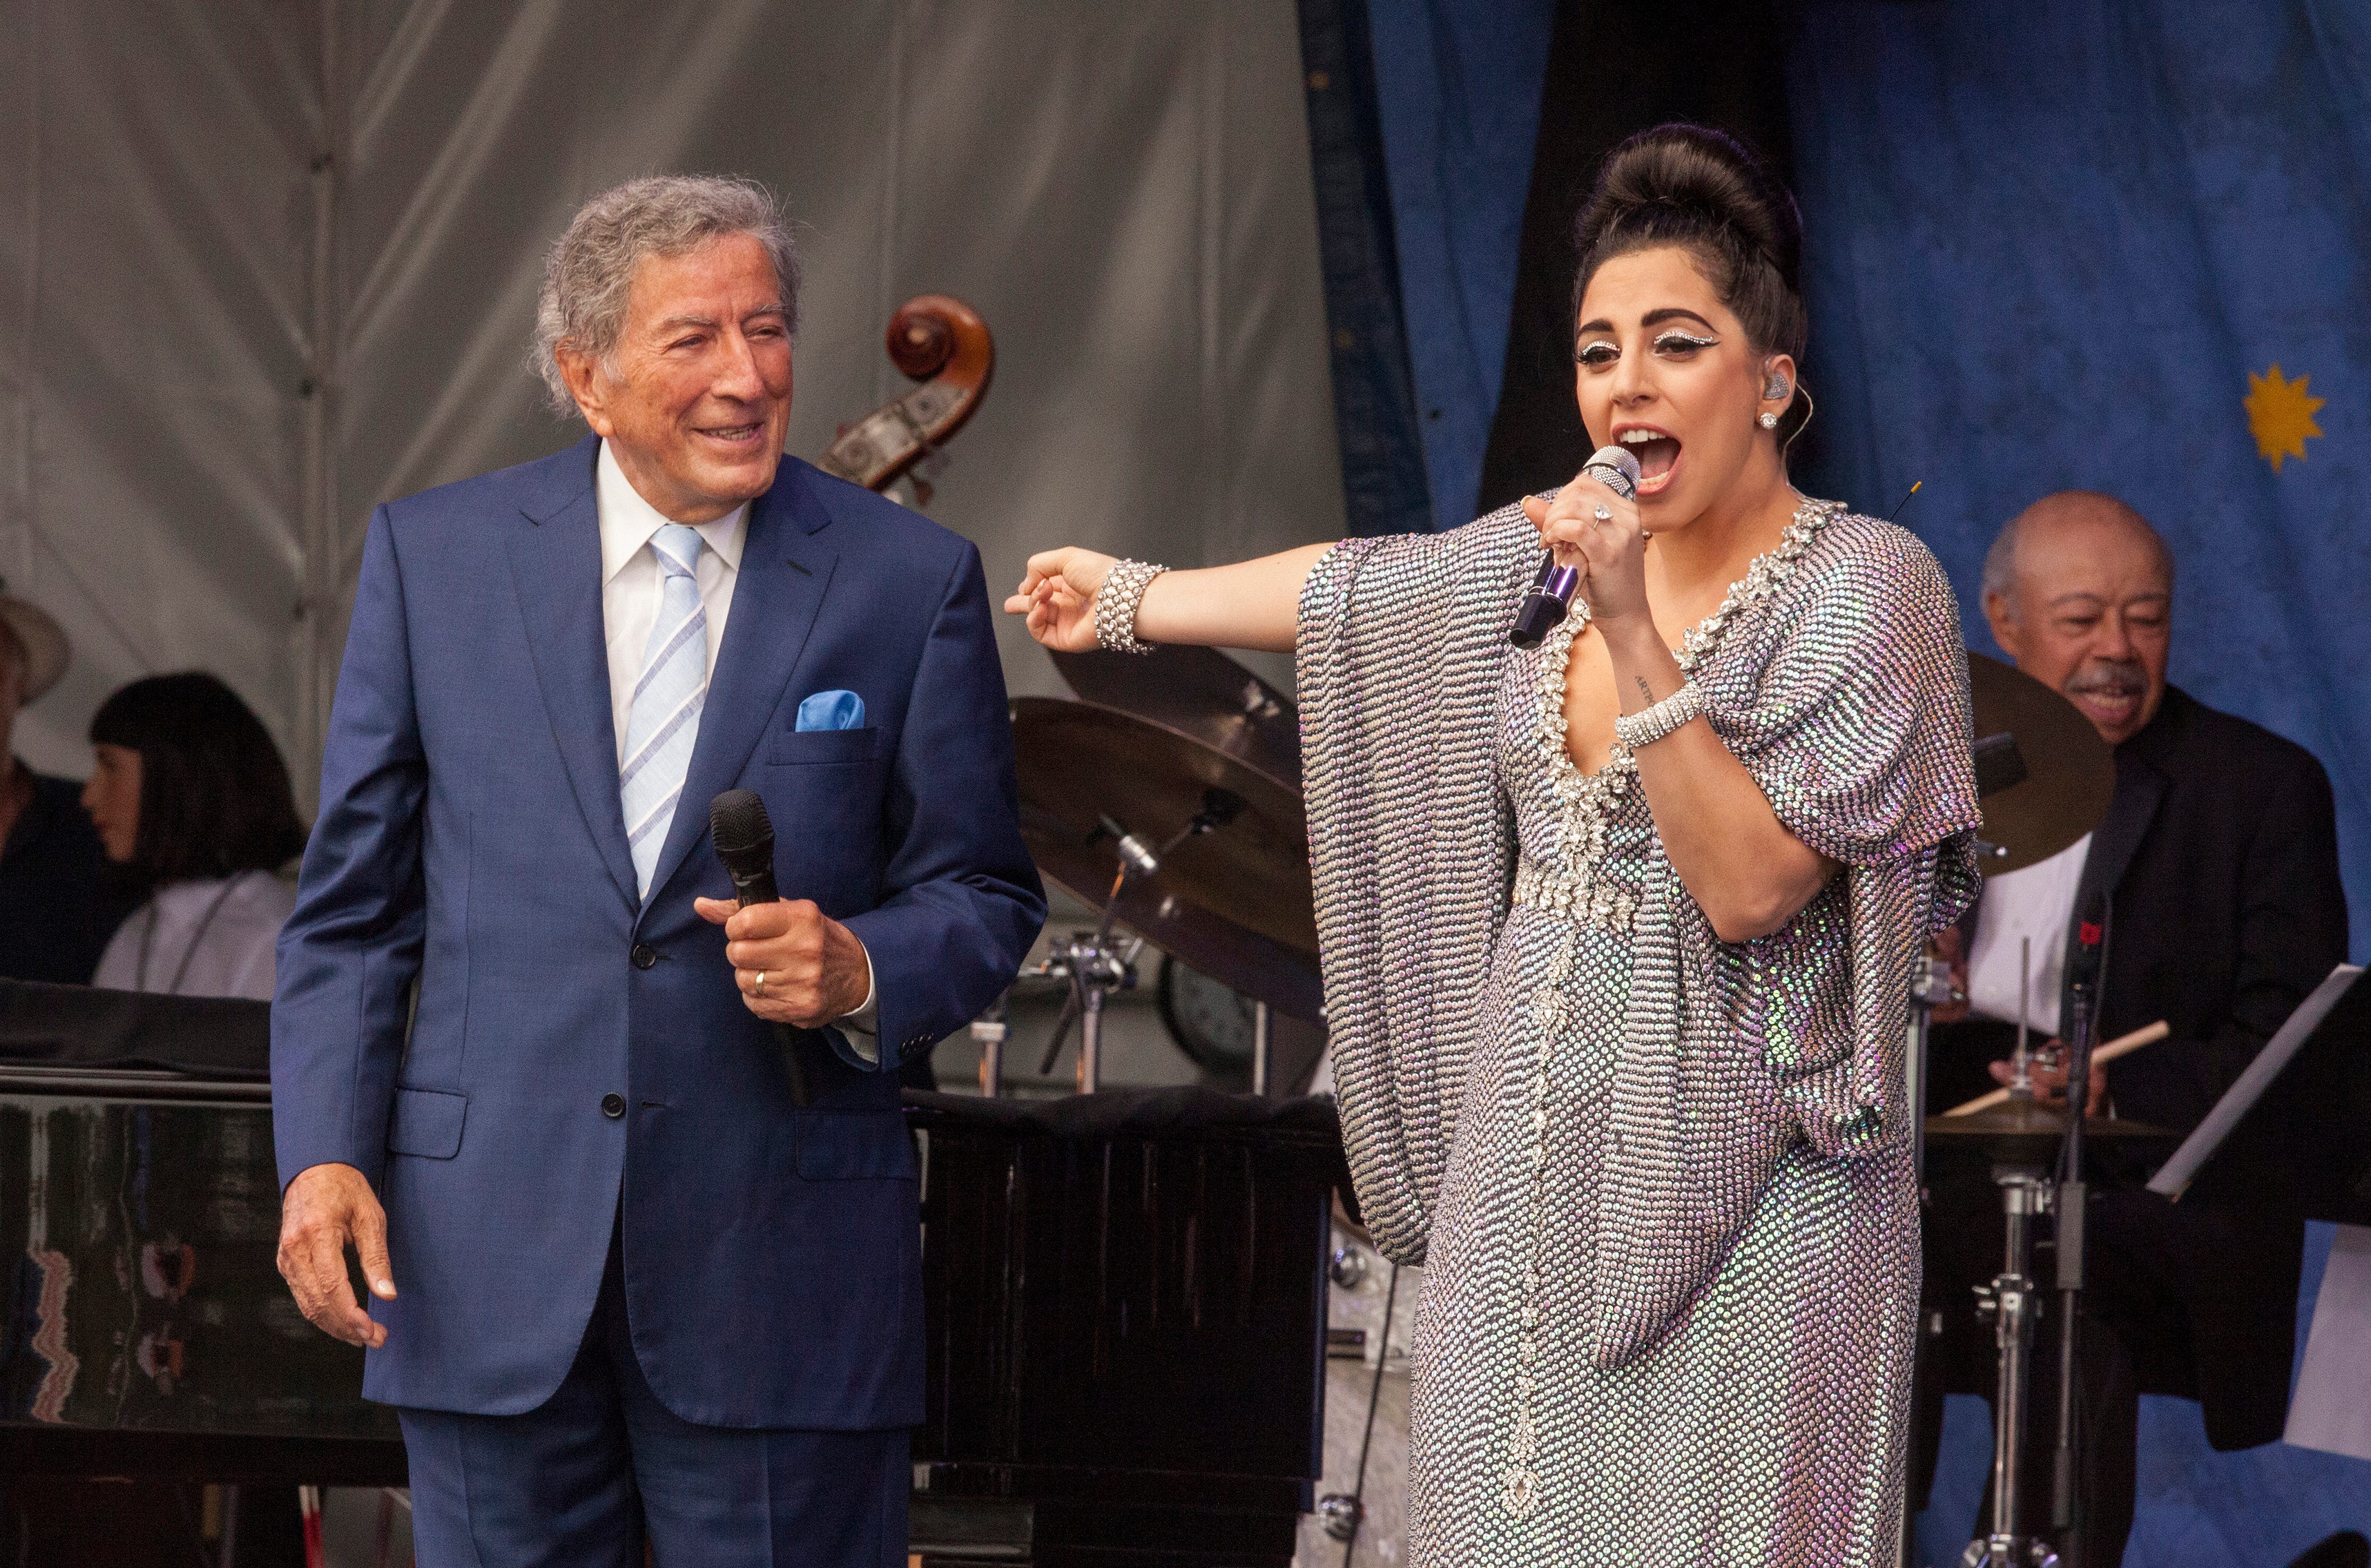 Bennett and Lady Gaga performing in New Orleans in 2015 and their album together, ‘Cheek to Cheek’, won a Grammy